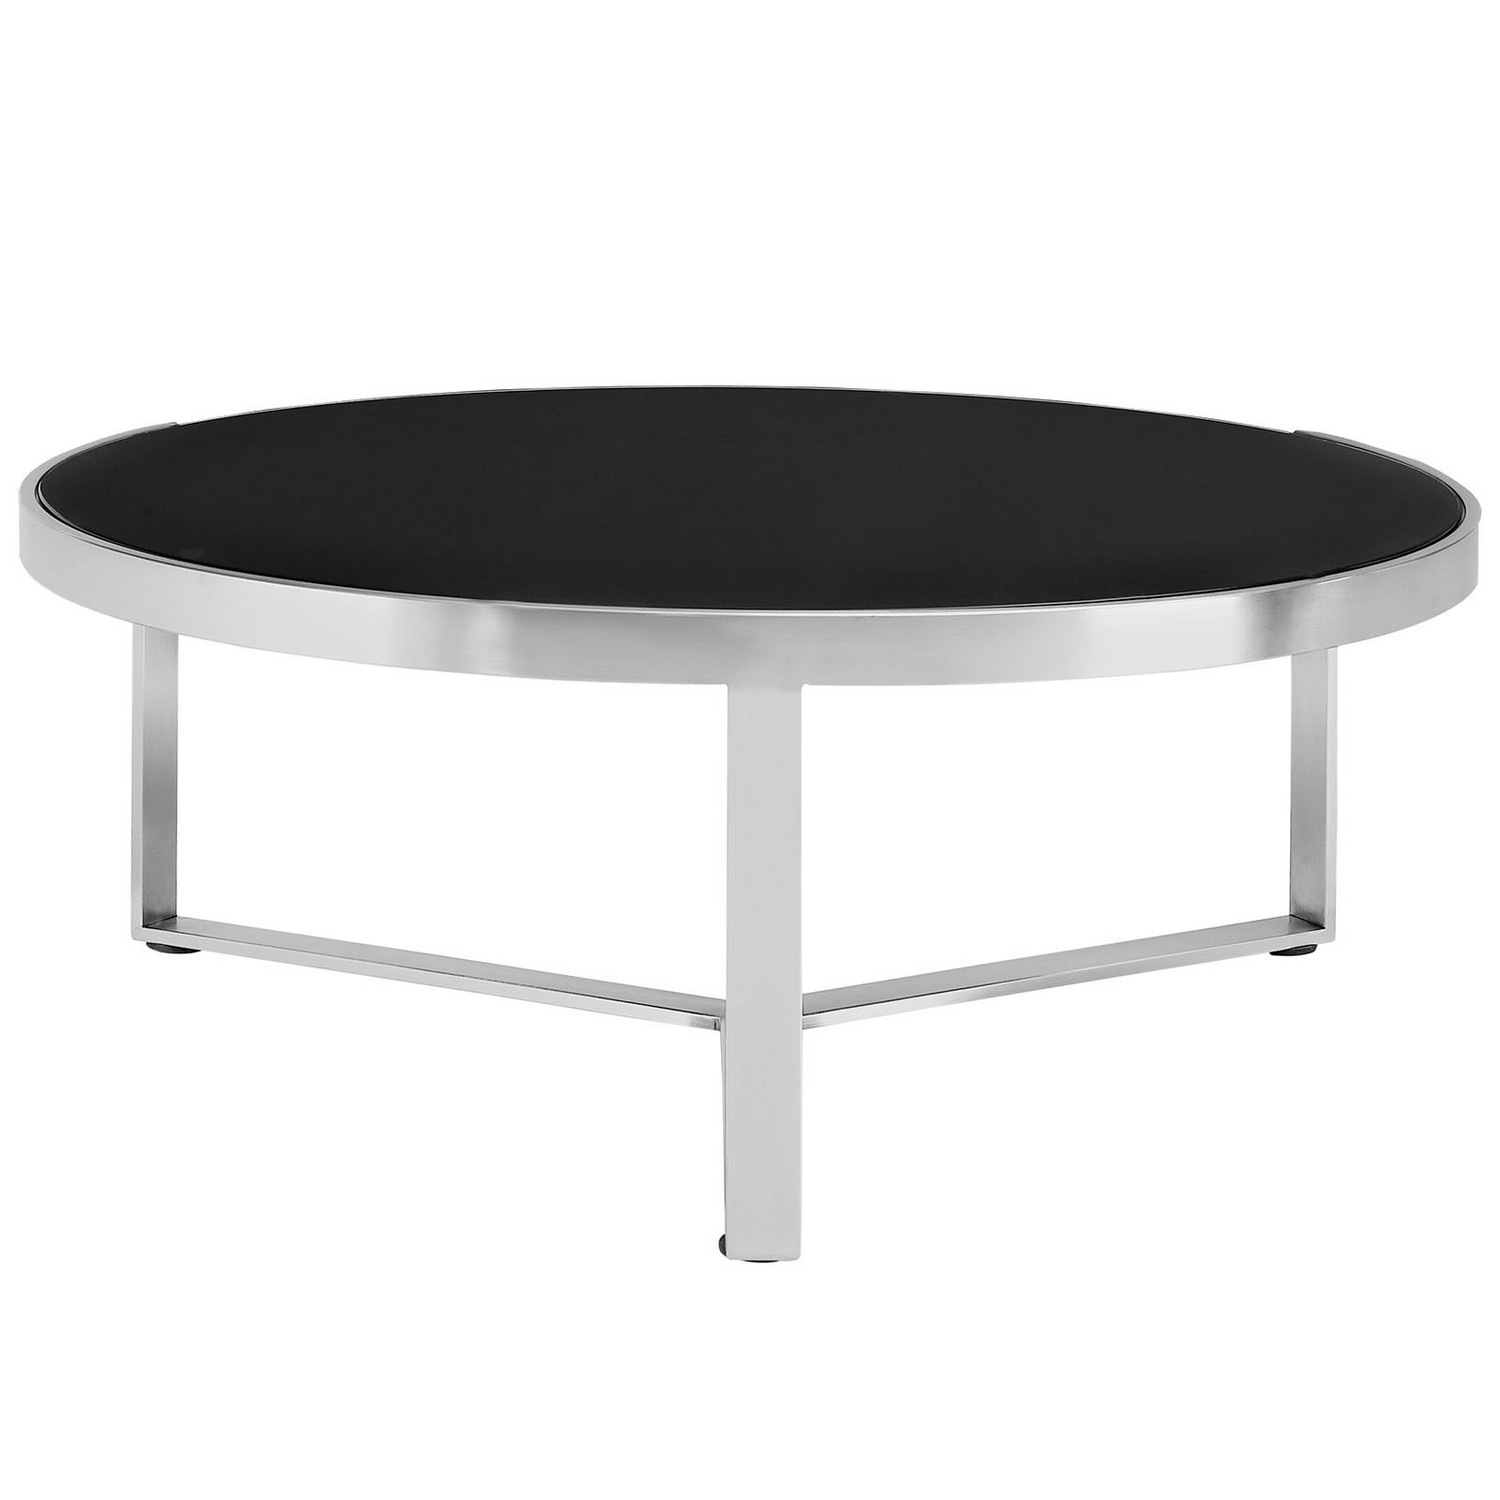 Modway Disk Coffee Table - Black